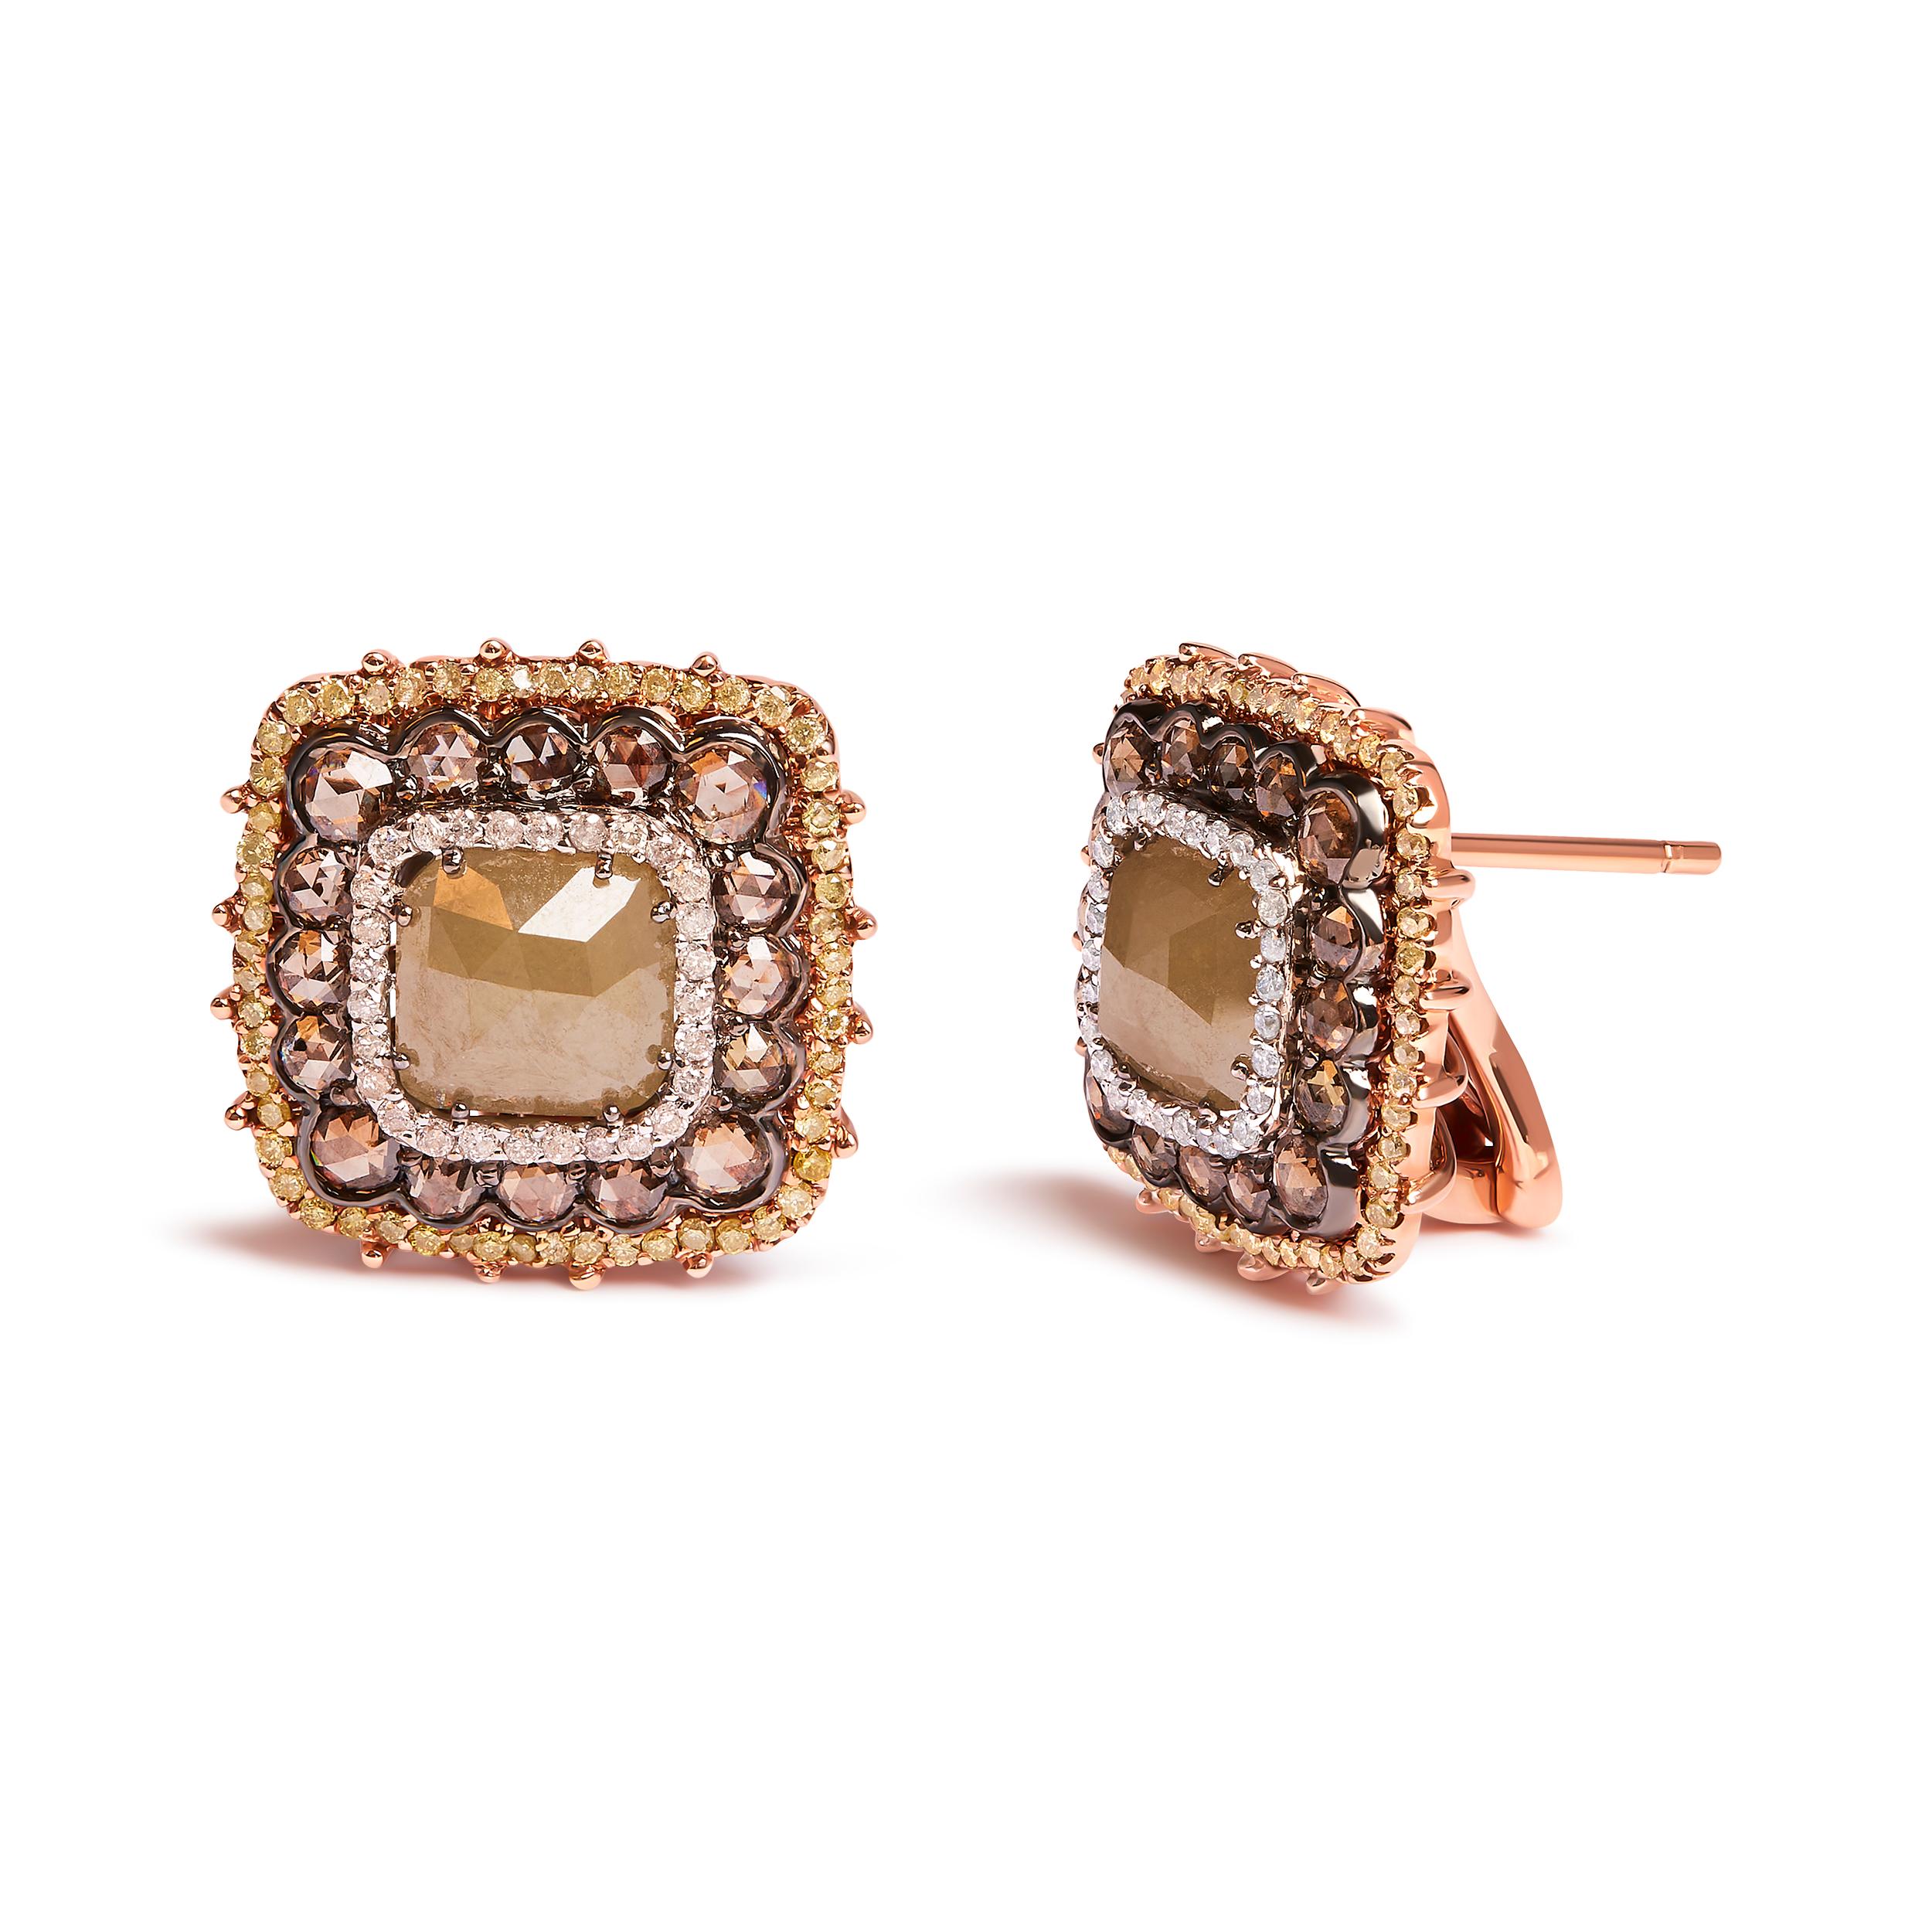 Introducing a dazzling masterpiece crafted to captivate! These 14K Rose Gold Stud Earrings boast an astonishing 5 7/8 Cttw of Fancy Color Rose Cut Diamonds, meticulously arranged in a Cushion Shape Triple Halo design. With a total of 202 diamonds,